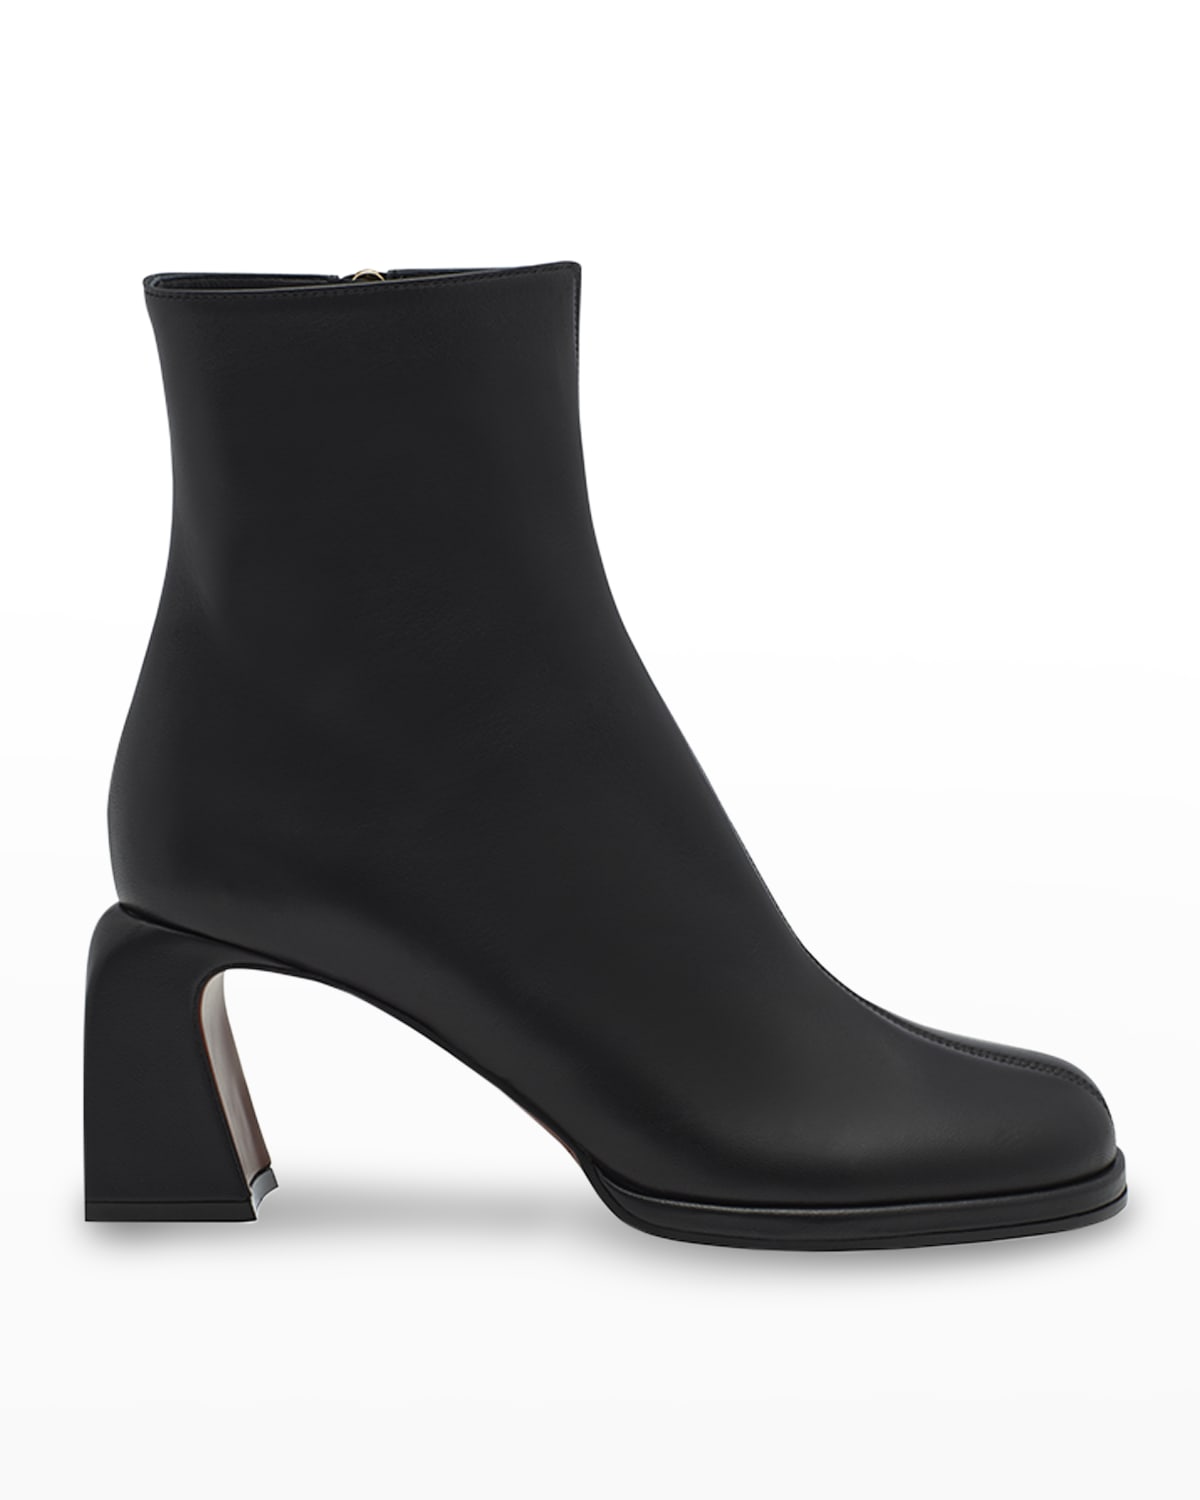 MANU ATELIER Chae Lambskin Ankle Booties